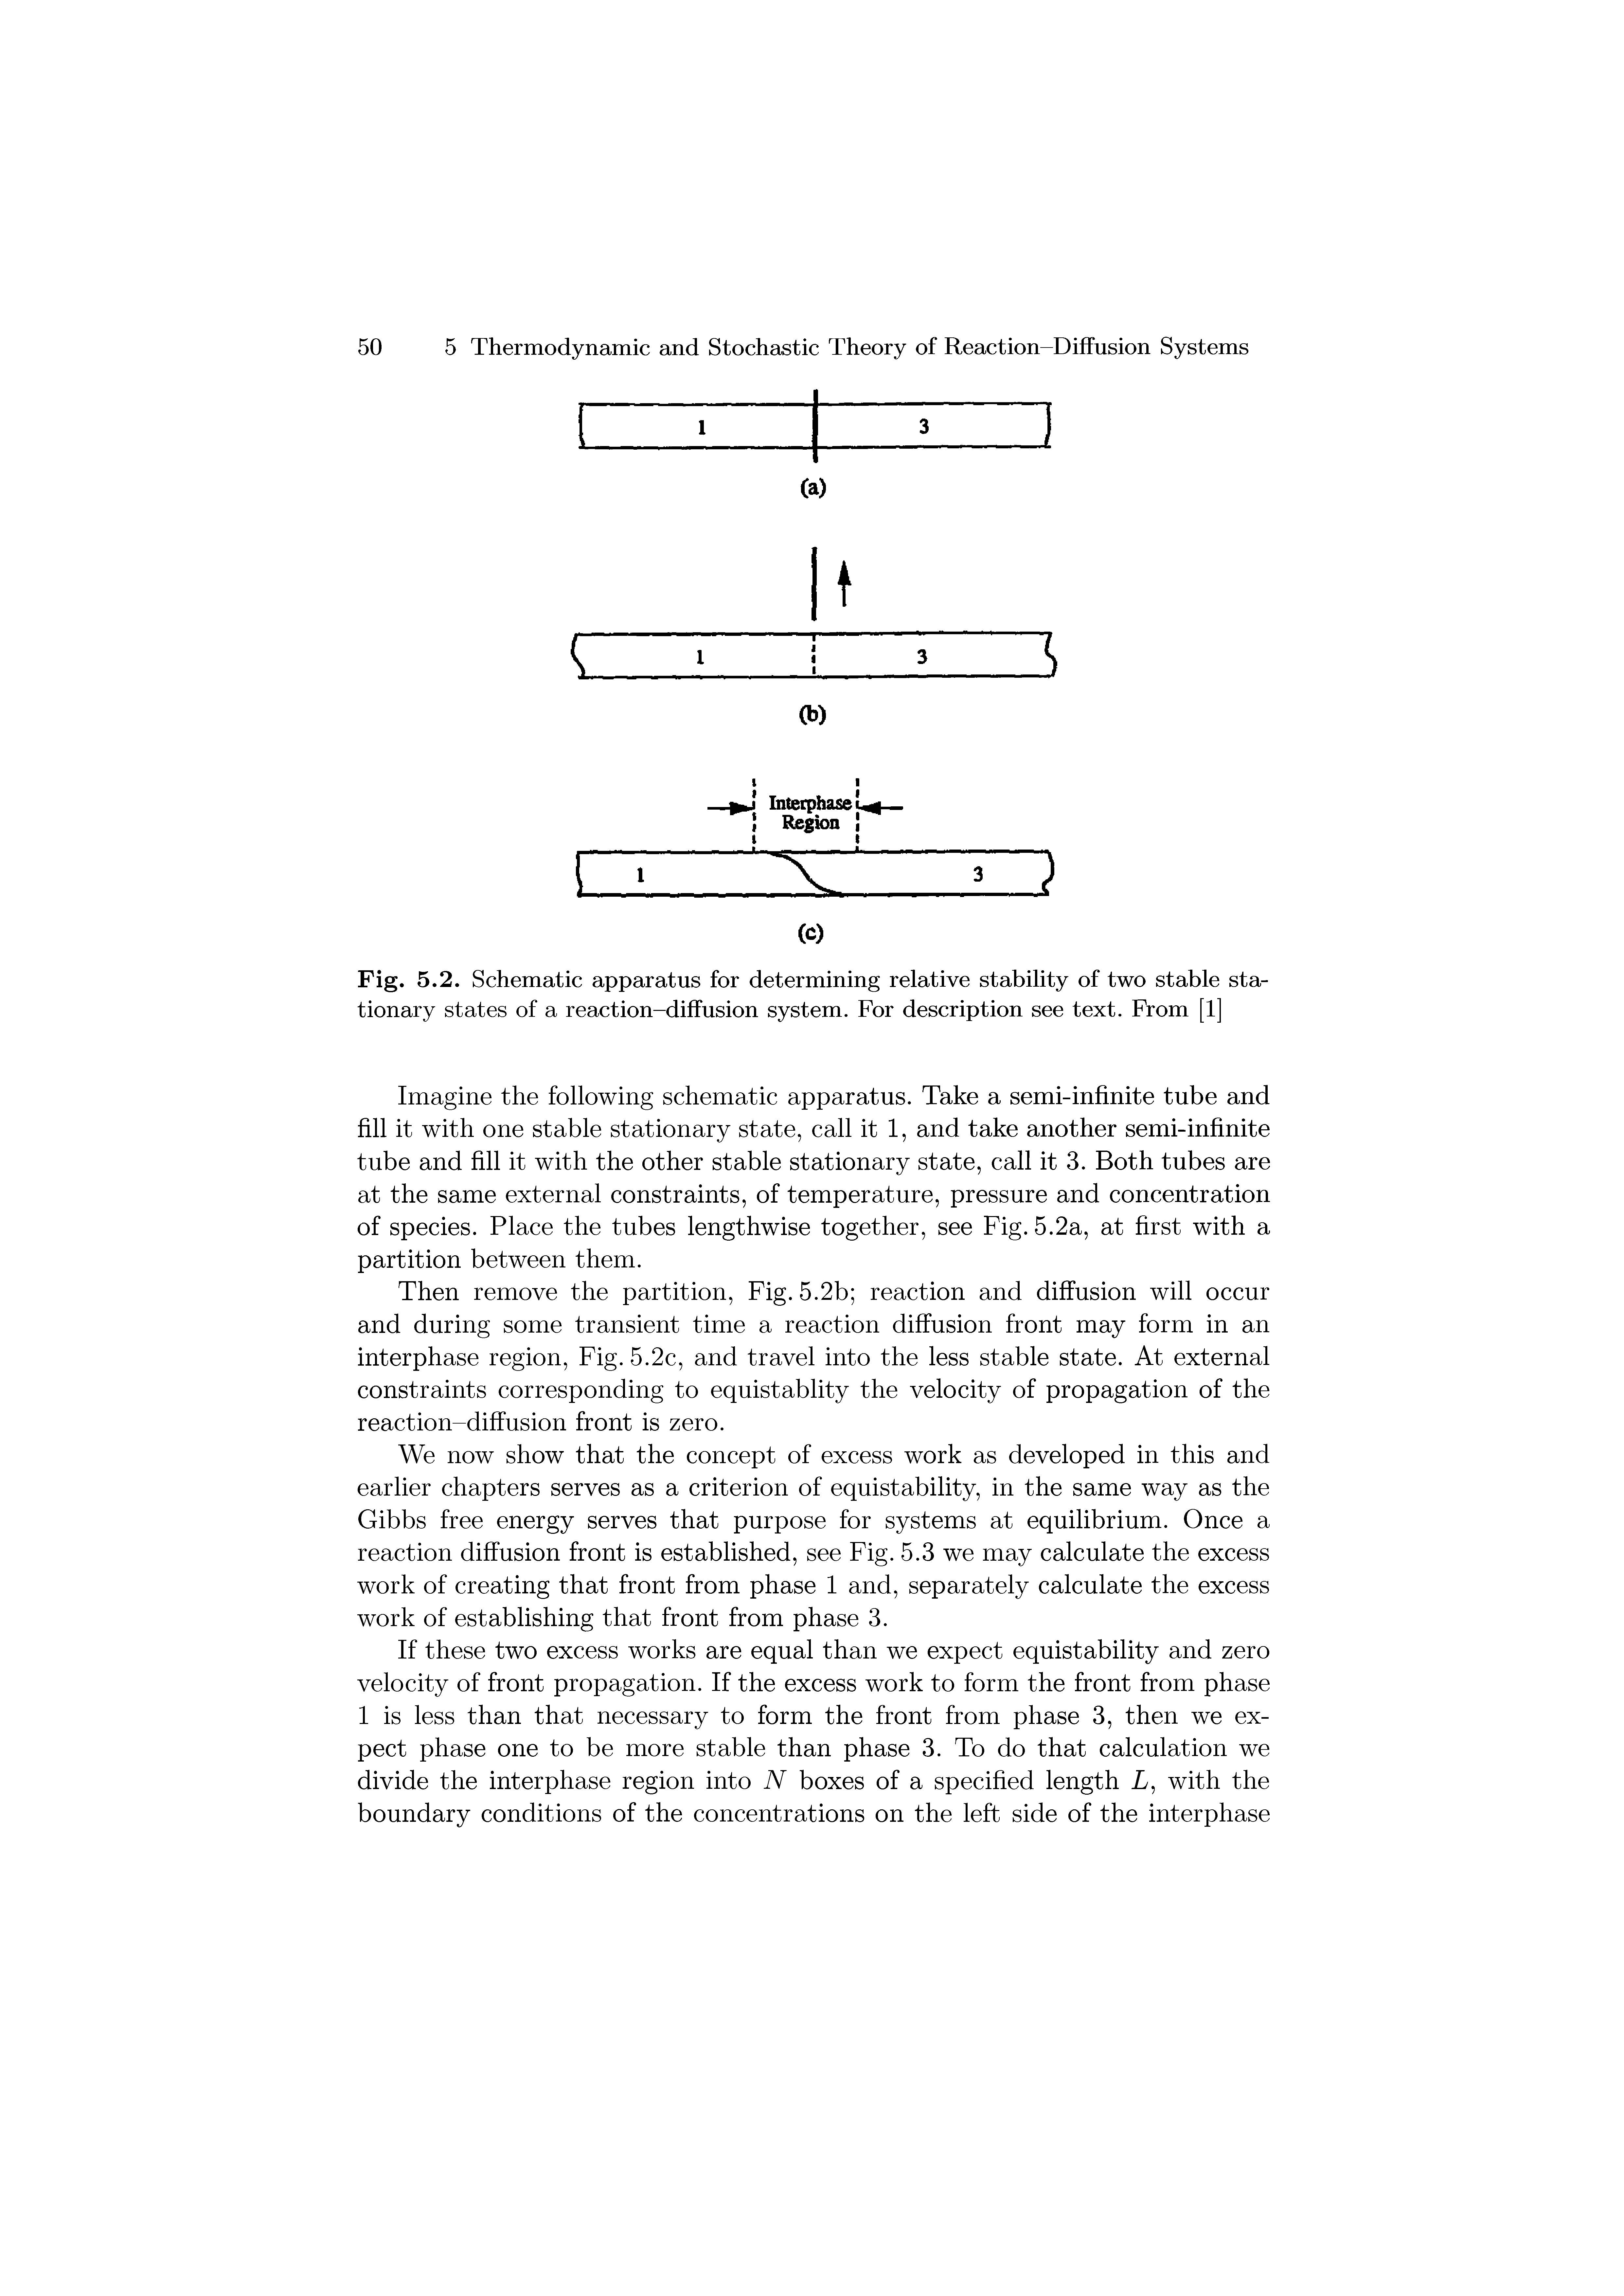 Fig. 5.2. Schematic apparatus for determining relative stability of two stable stationary states of a reaction-diffusion system. For description see text. Prom [1]...